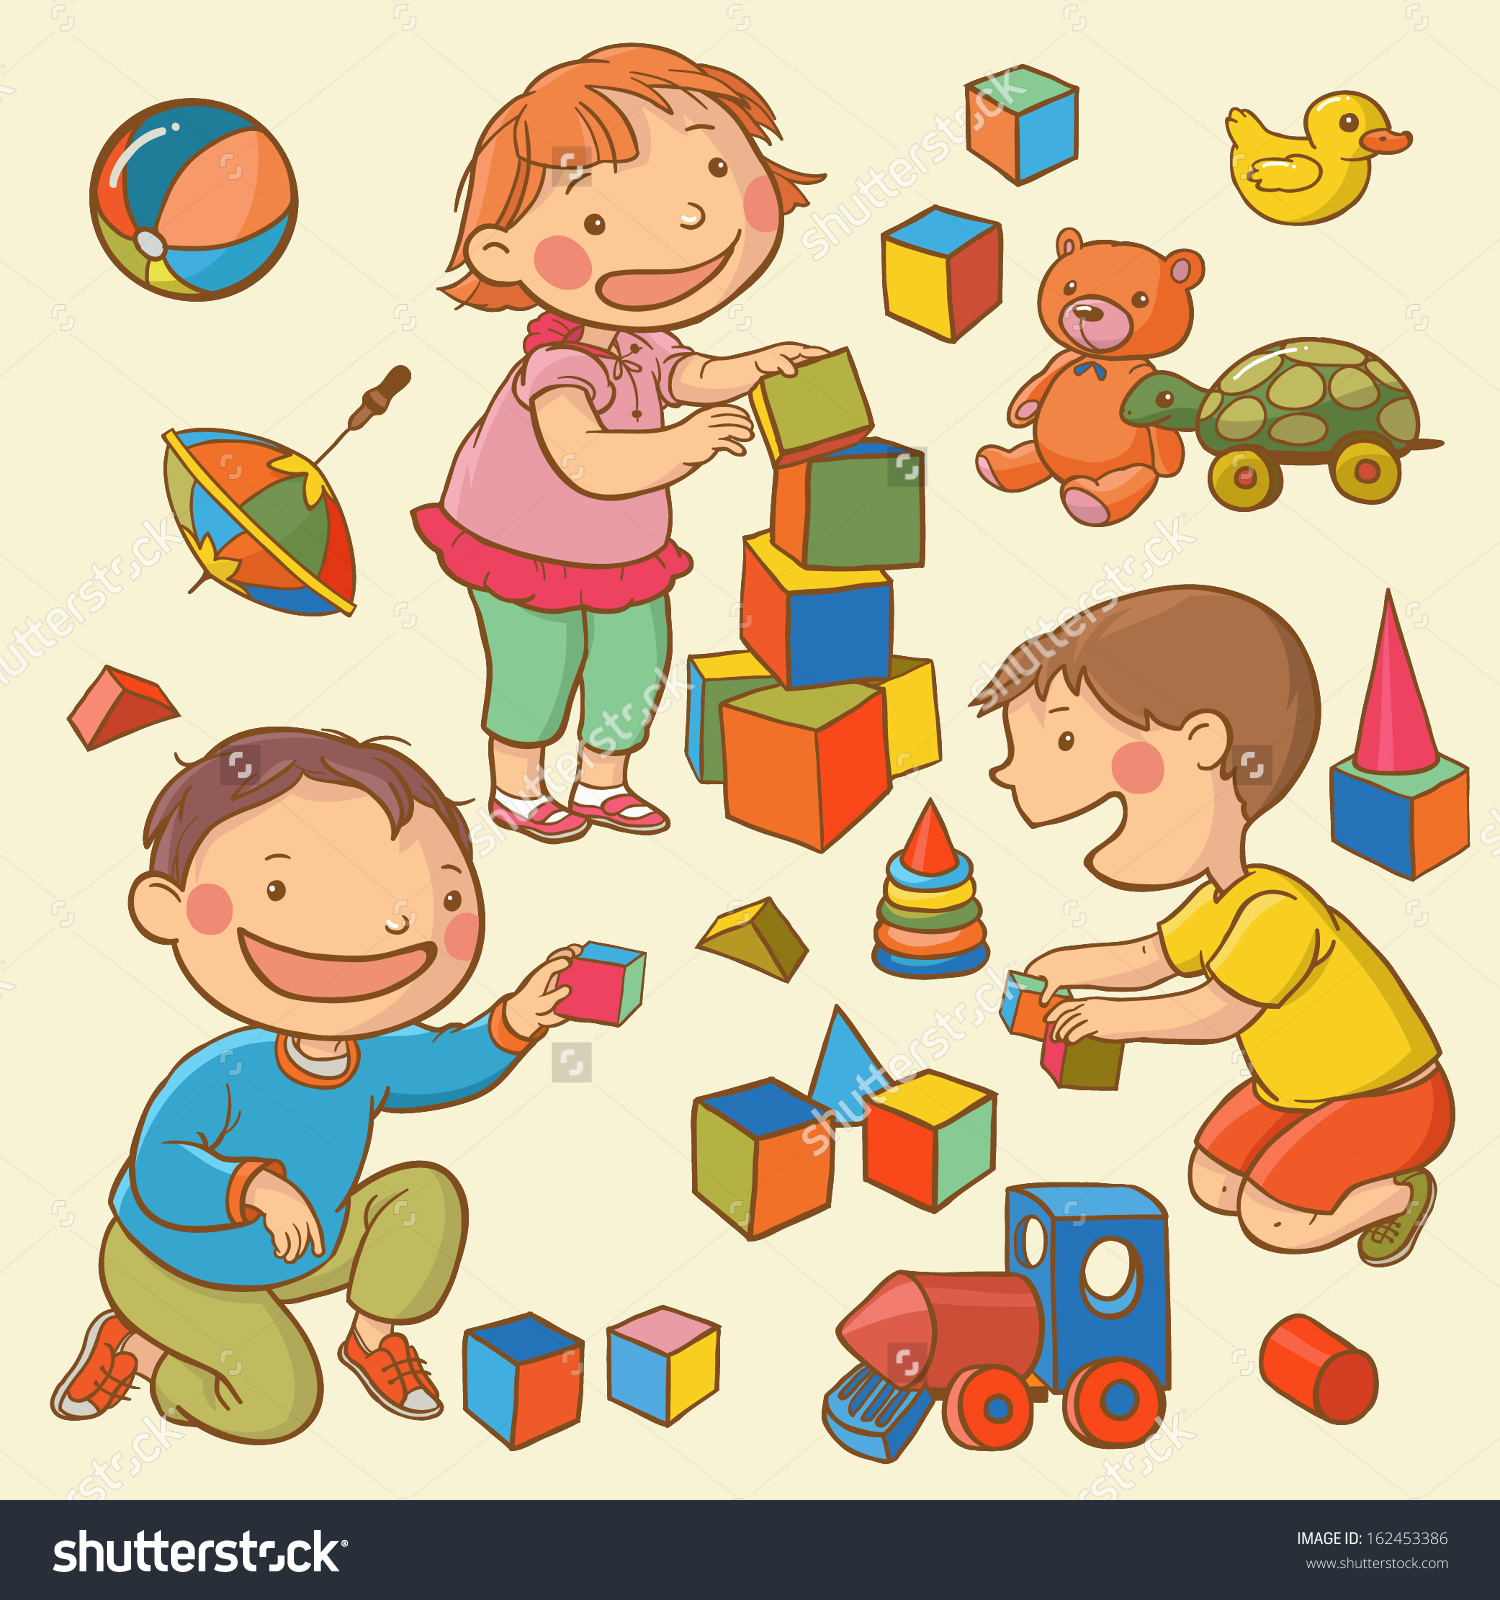 Children playing with toys clipart